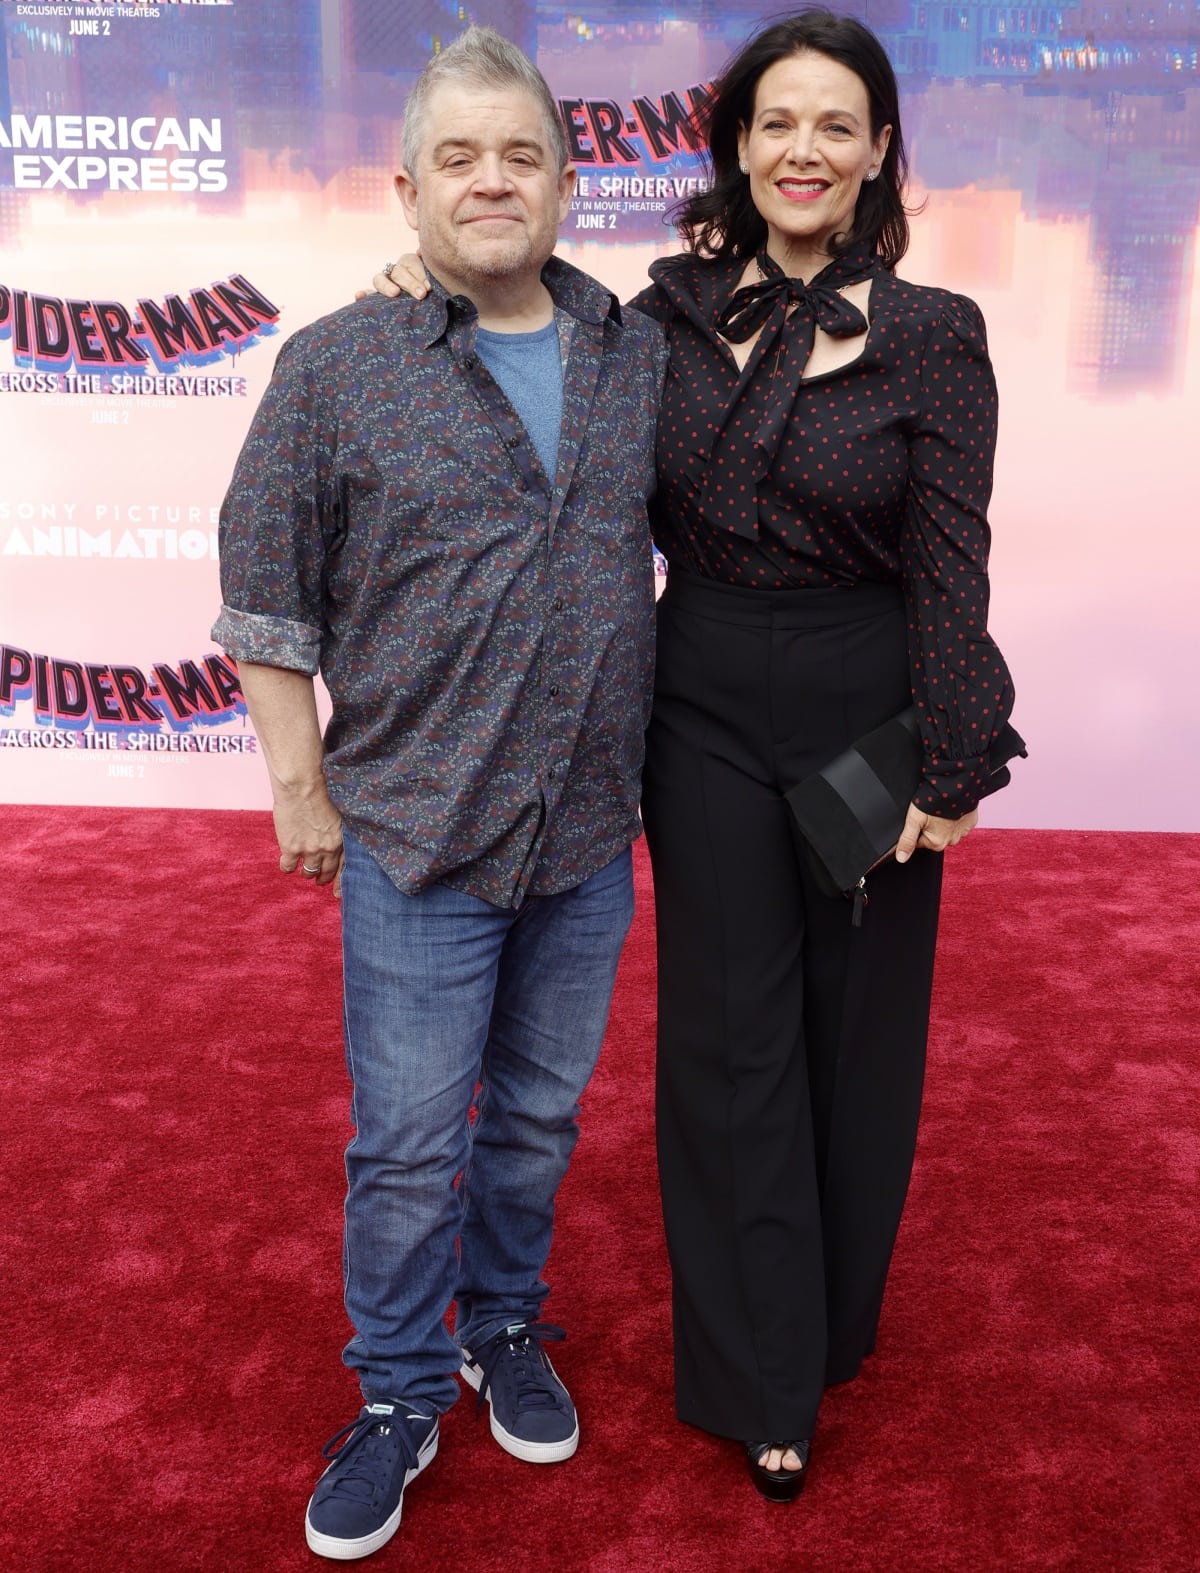 Patton Oswalt and Meredith Salenger making an appearance at the premiere of Spider-Man: Across the Spider-Verse